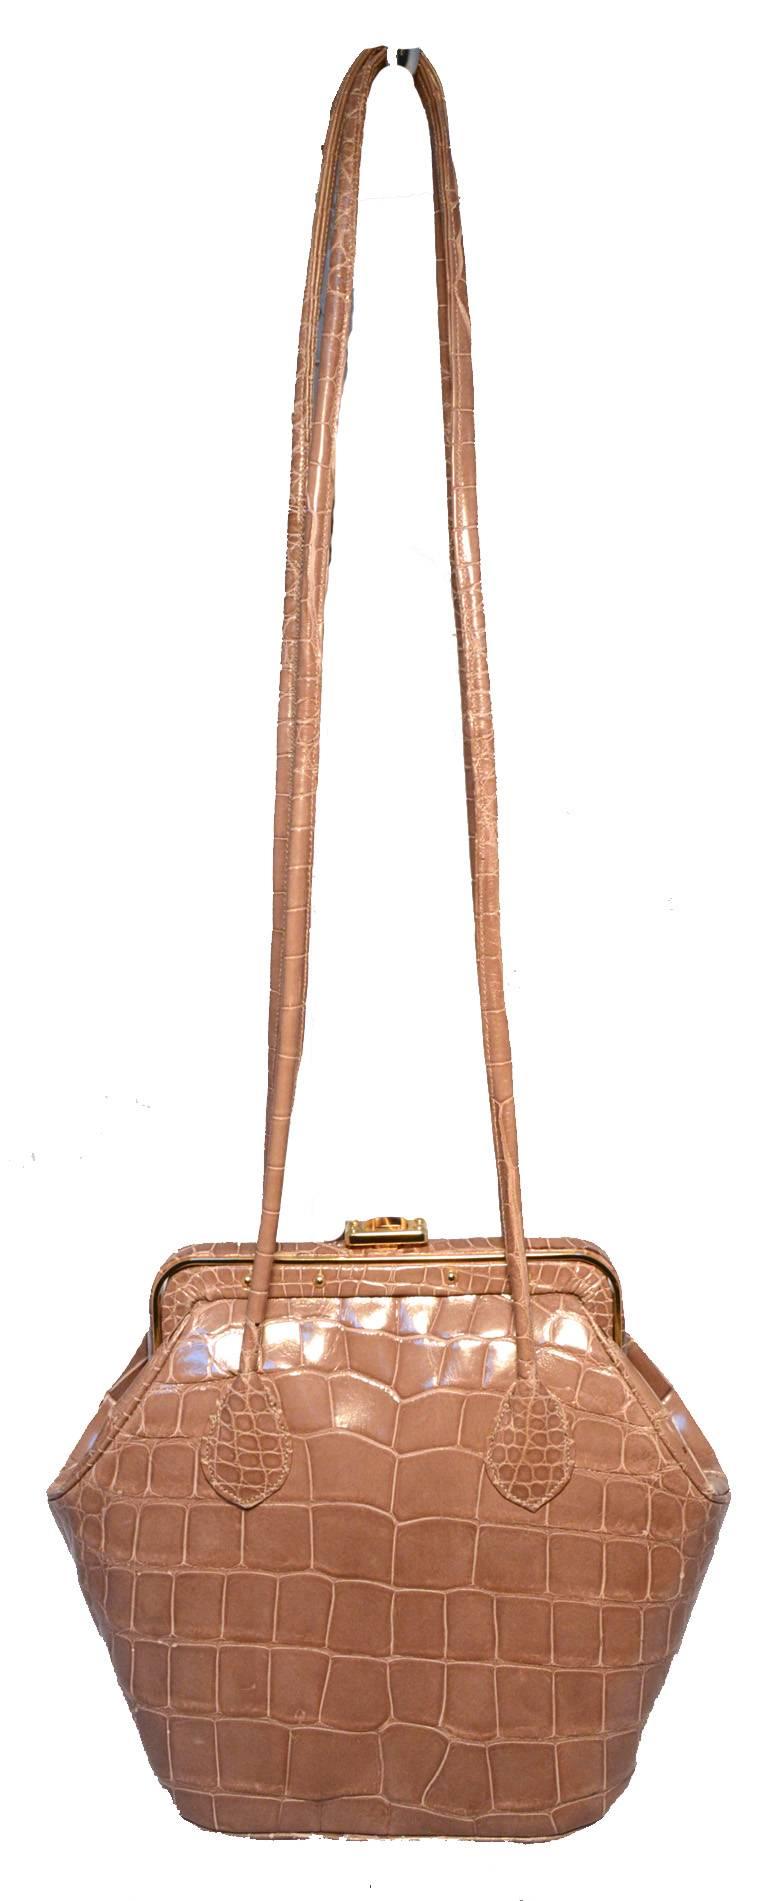 BEAUTIFUL Judith Leiber vintage alligator shoulder bag in excellent condition.  Taupe alligator leather exterior trimmed with gold hardware, double shoulder straps, and top tigers eye button closure.  Leather lined interior holds 2 slit side